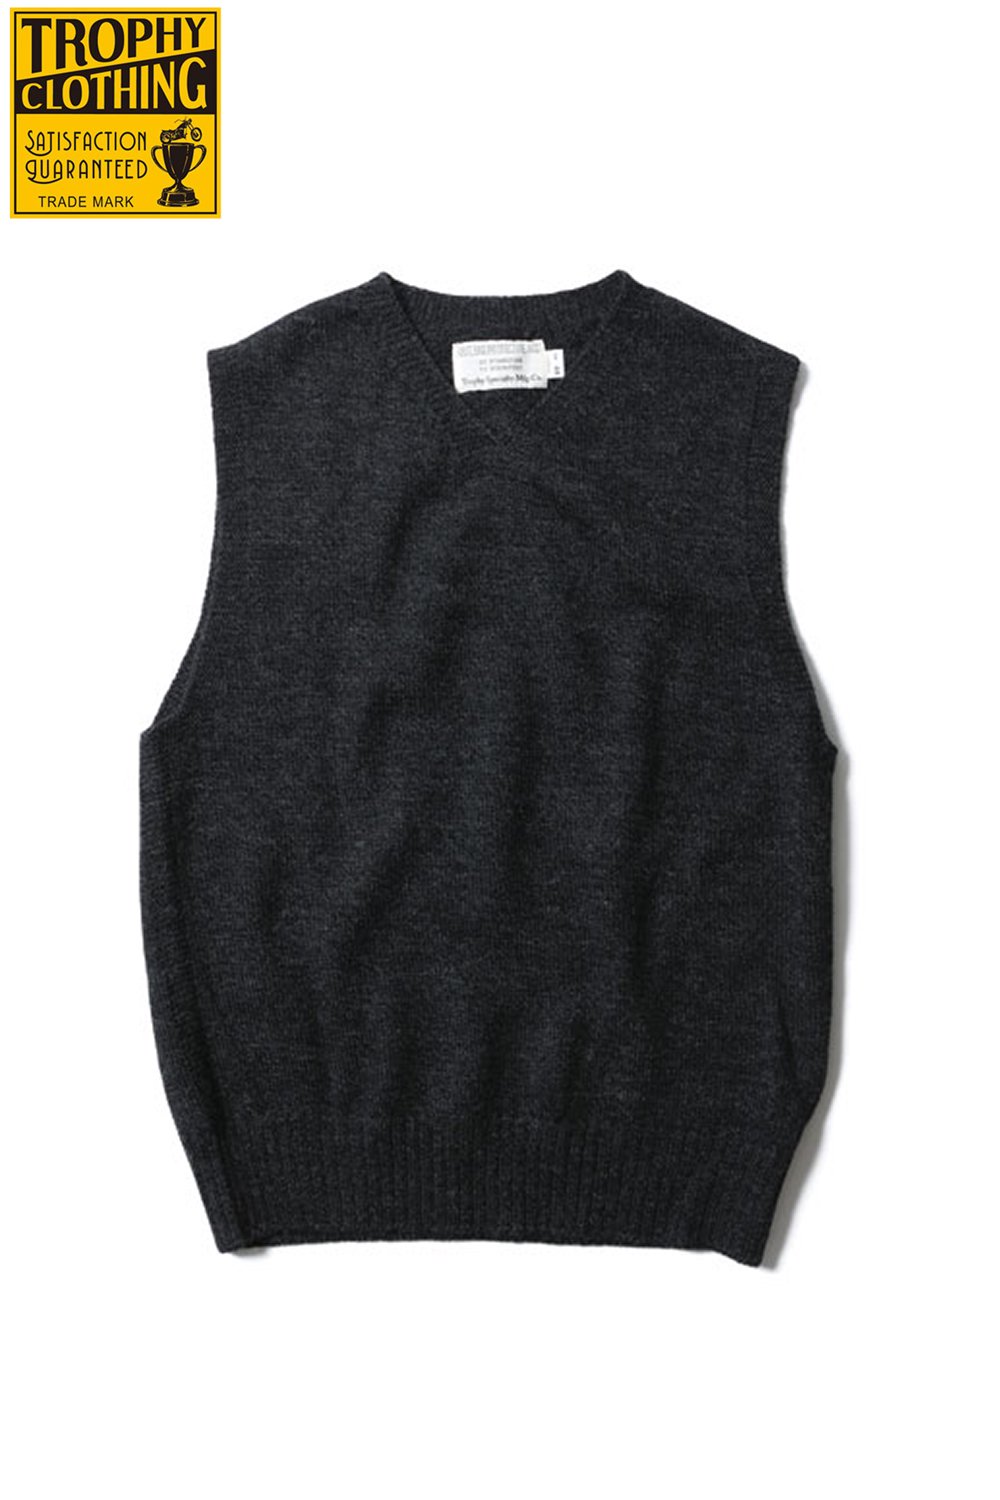 TROPHY CLOTHING(トロフィークロージング) ニットベスト RED CROSS KNIT VEST TR19AW-304 通販正規取扱 |  ハーレムストア公式通販サイト